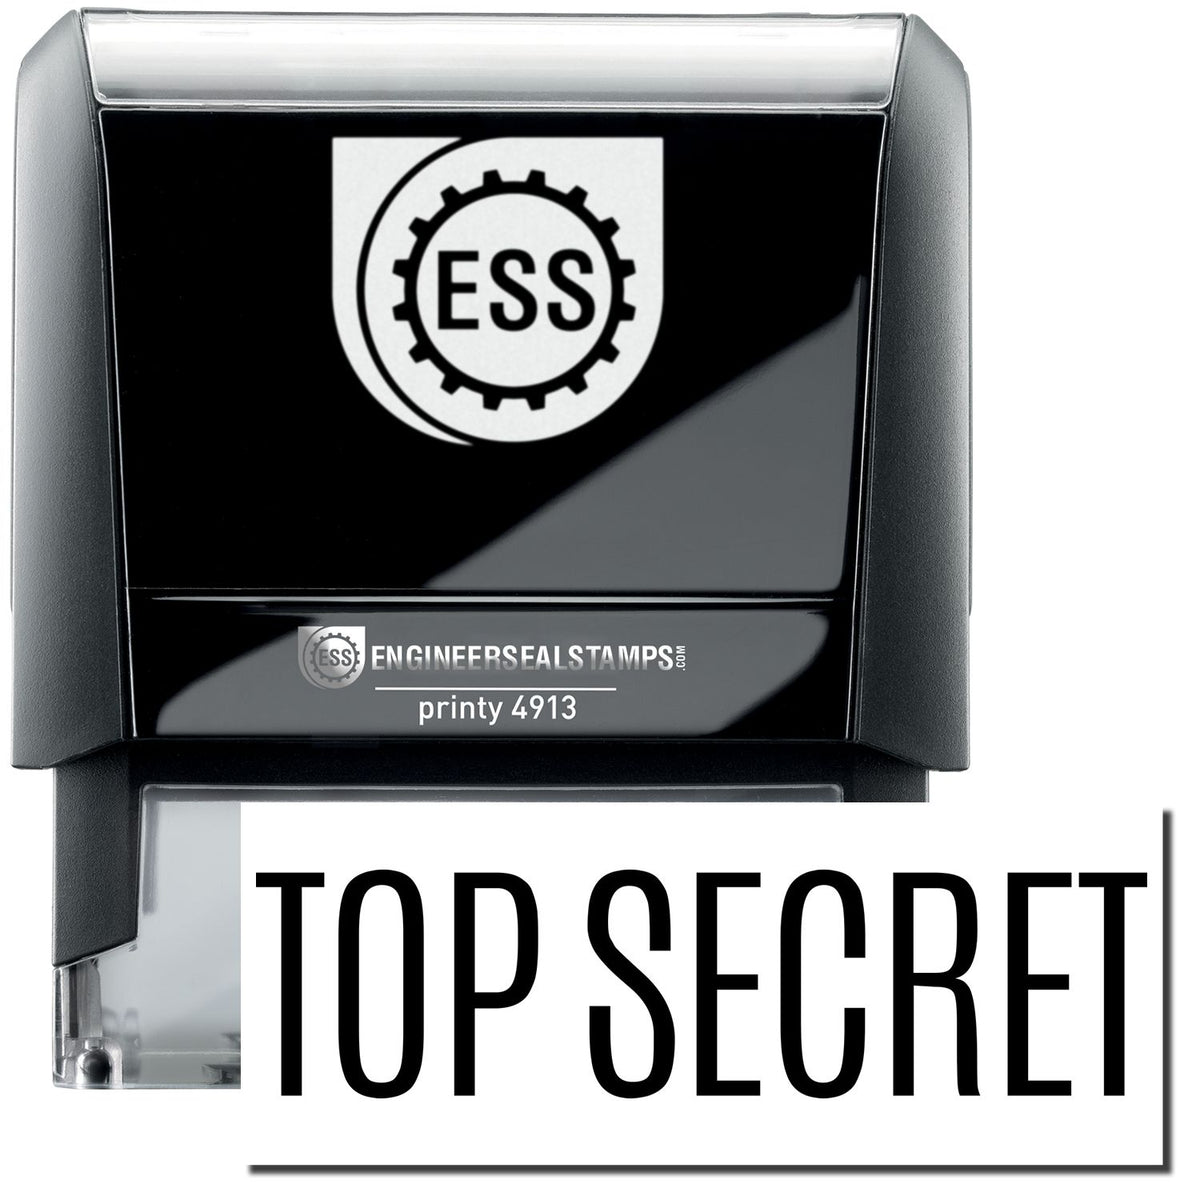 A self-inking stamp with a stamped image showing how the text &quot;TOP SECRET&quot; in a large font is displayed by it after stamping.